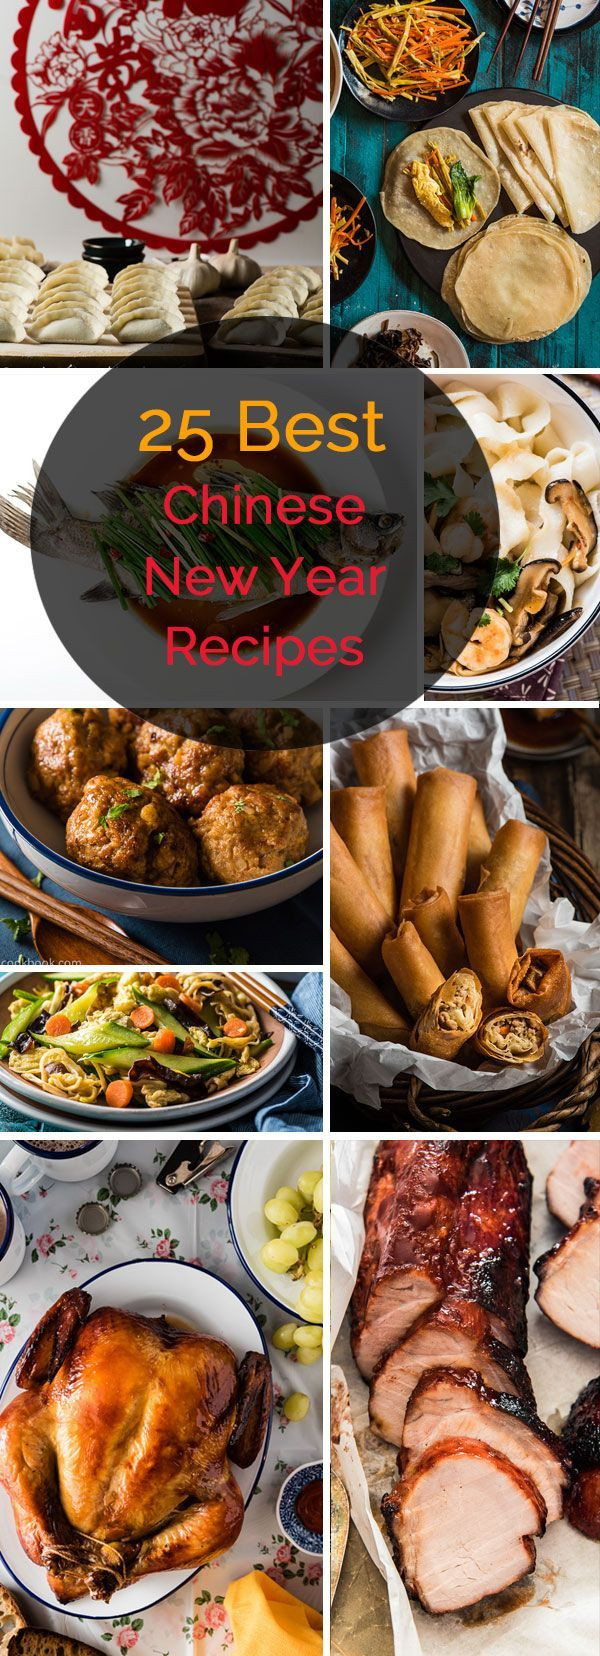 Best Chinese Dinners
 Top 25 Chinese New Year Recipes